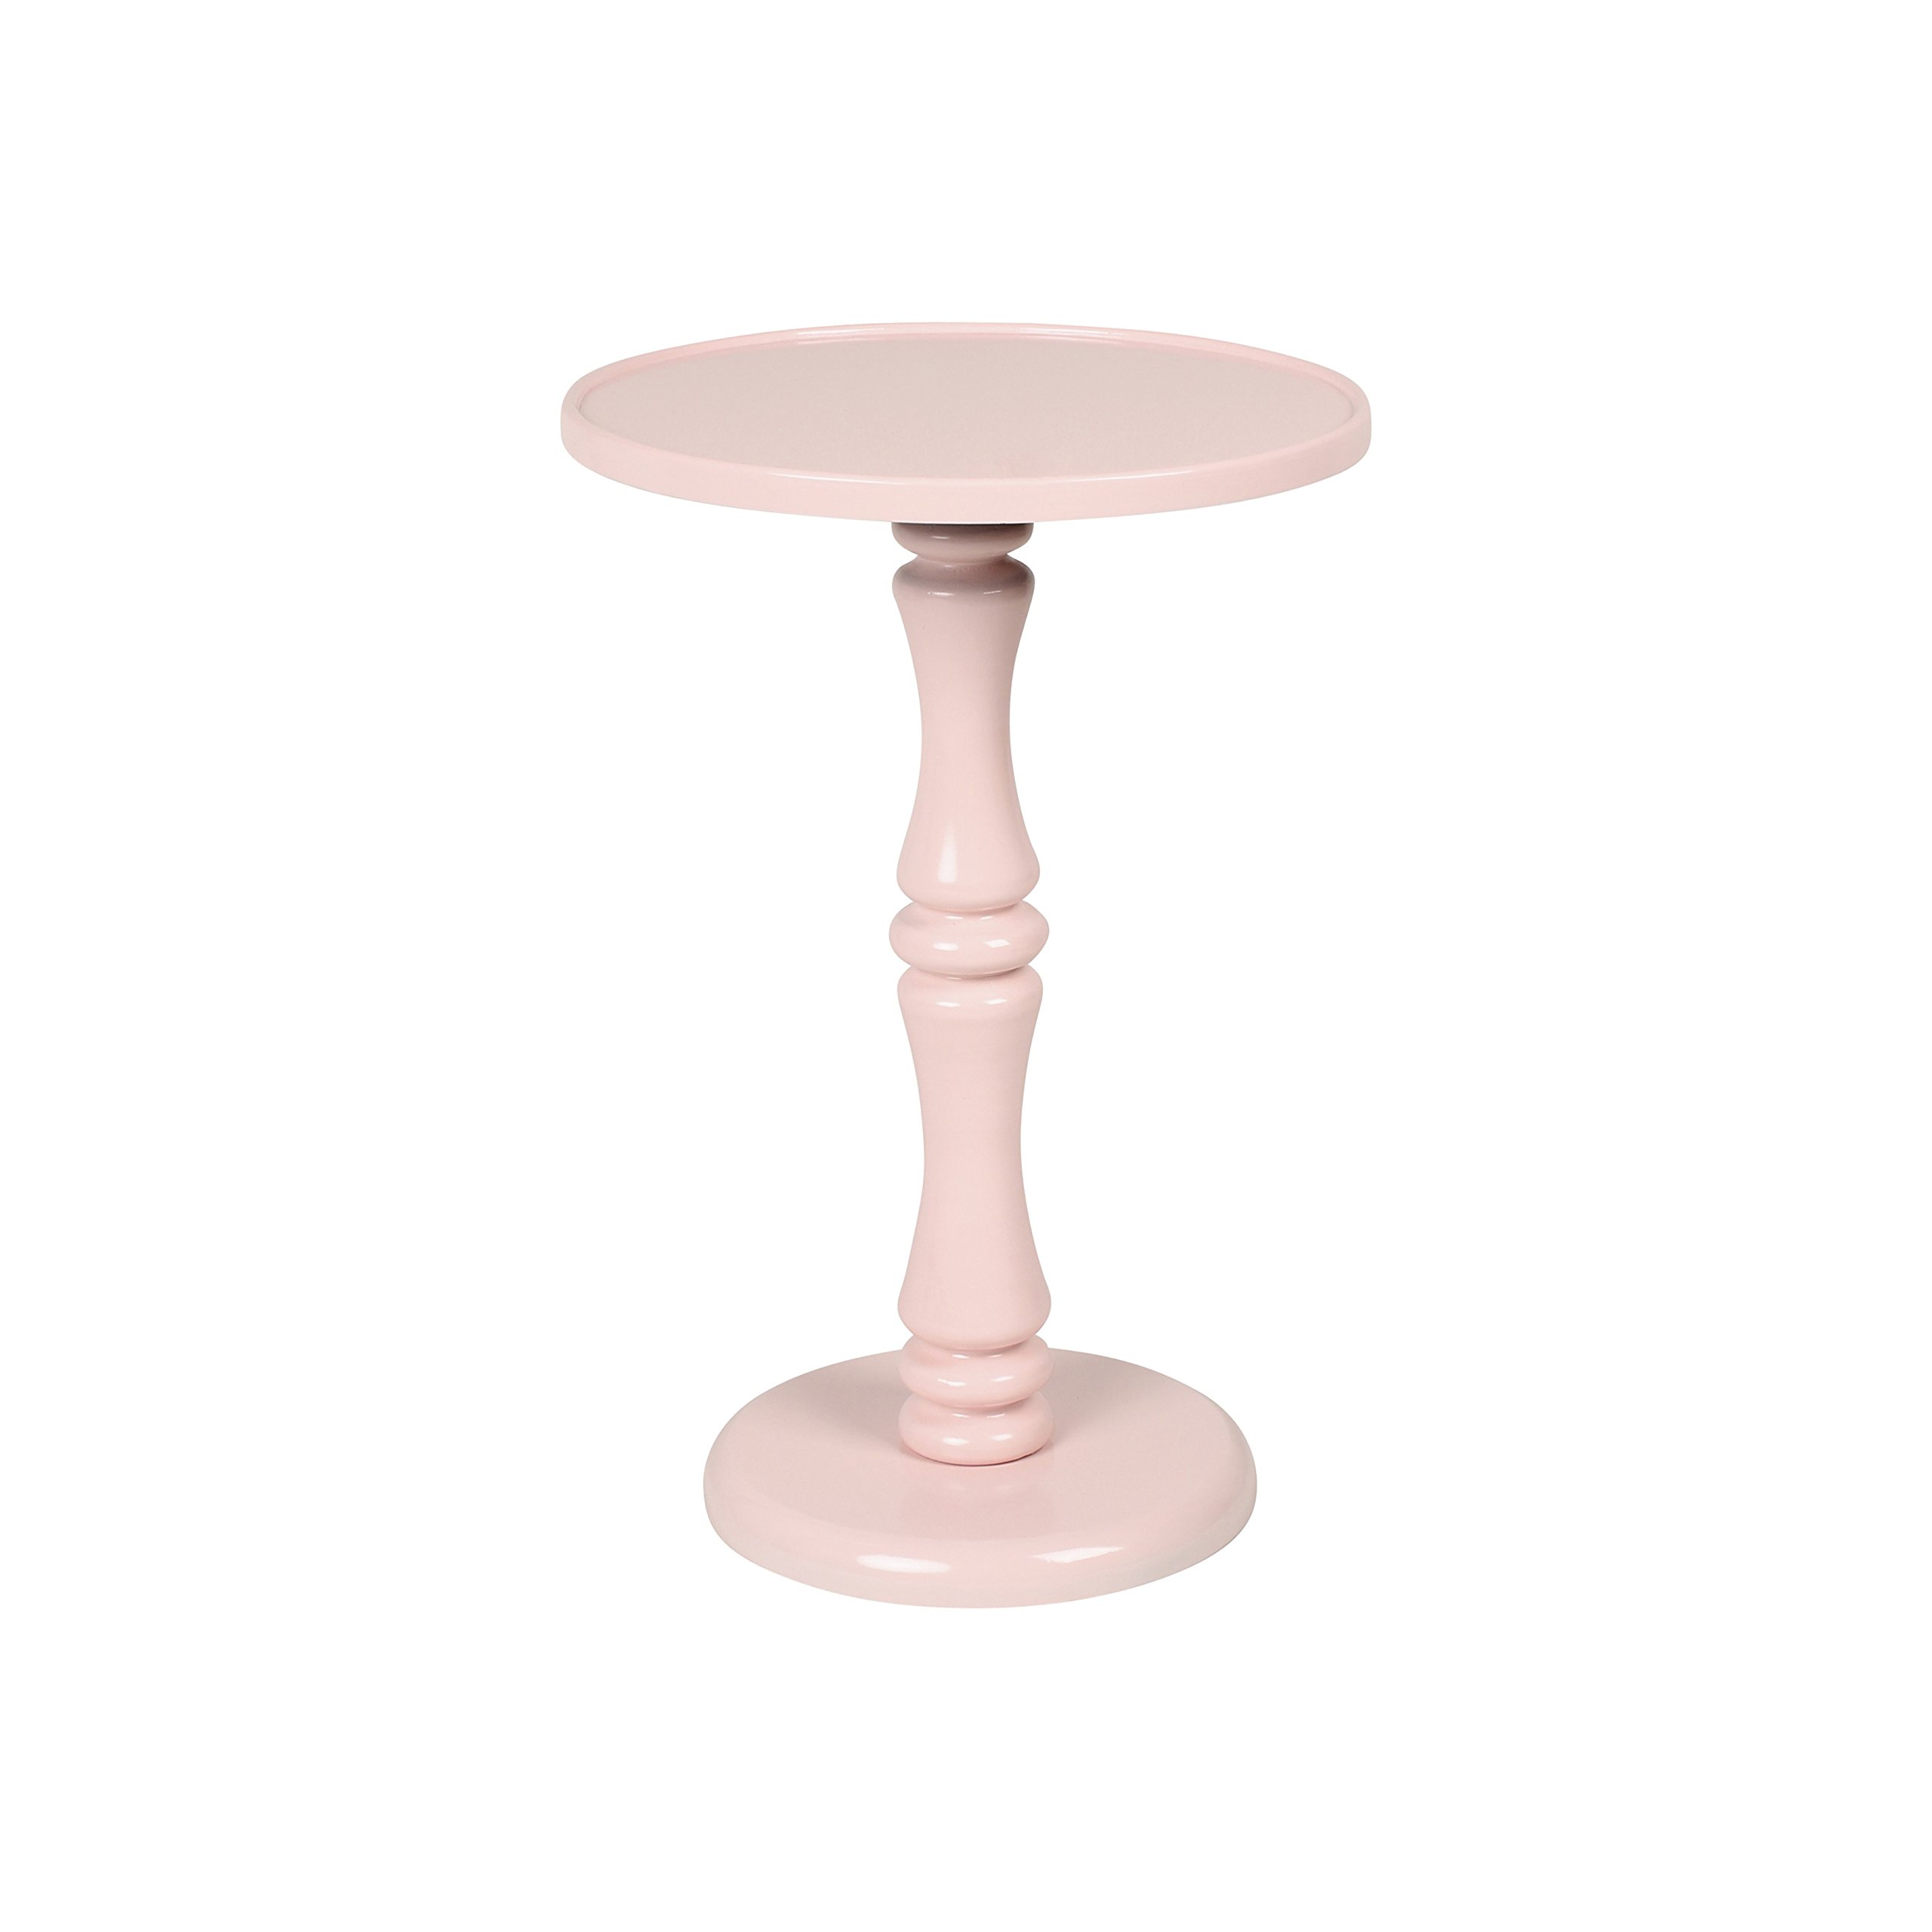 galleon kate and laurel rumi round wood pedestal accent table pink metal bronze patio side glass coffee designs mirrored occasional sets square bar small kitchen chairs set white